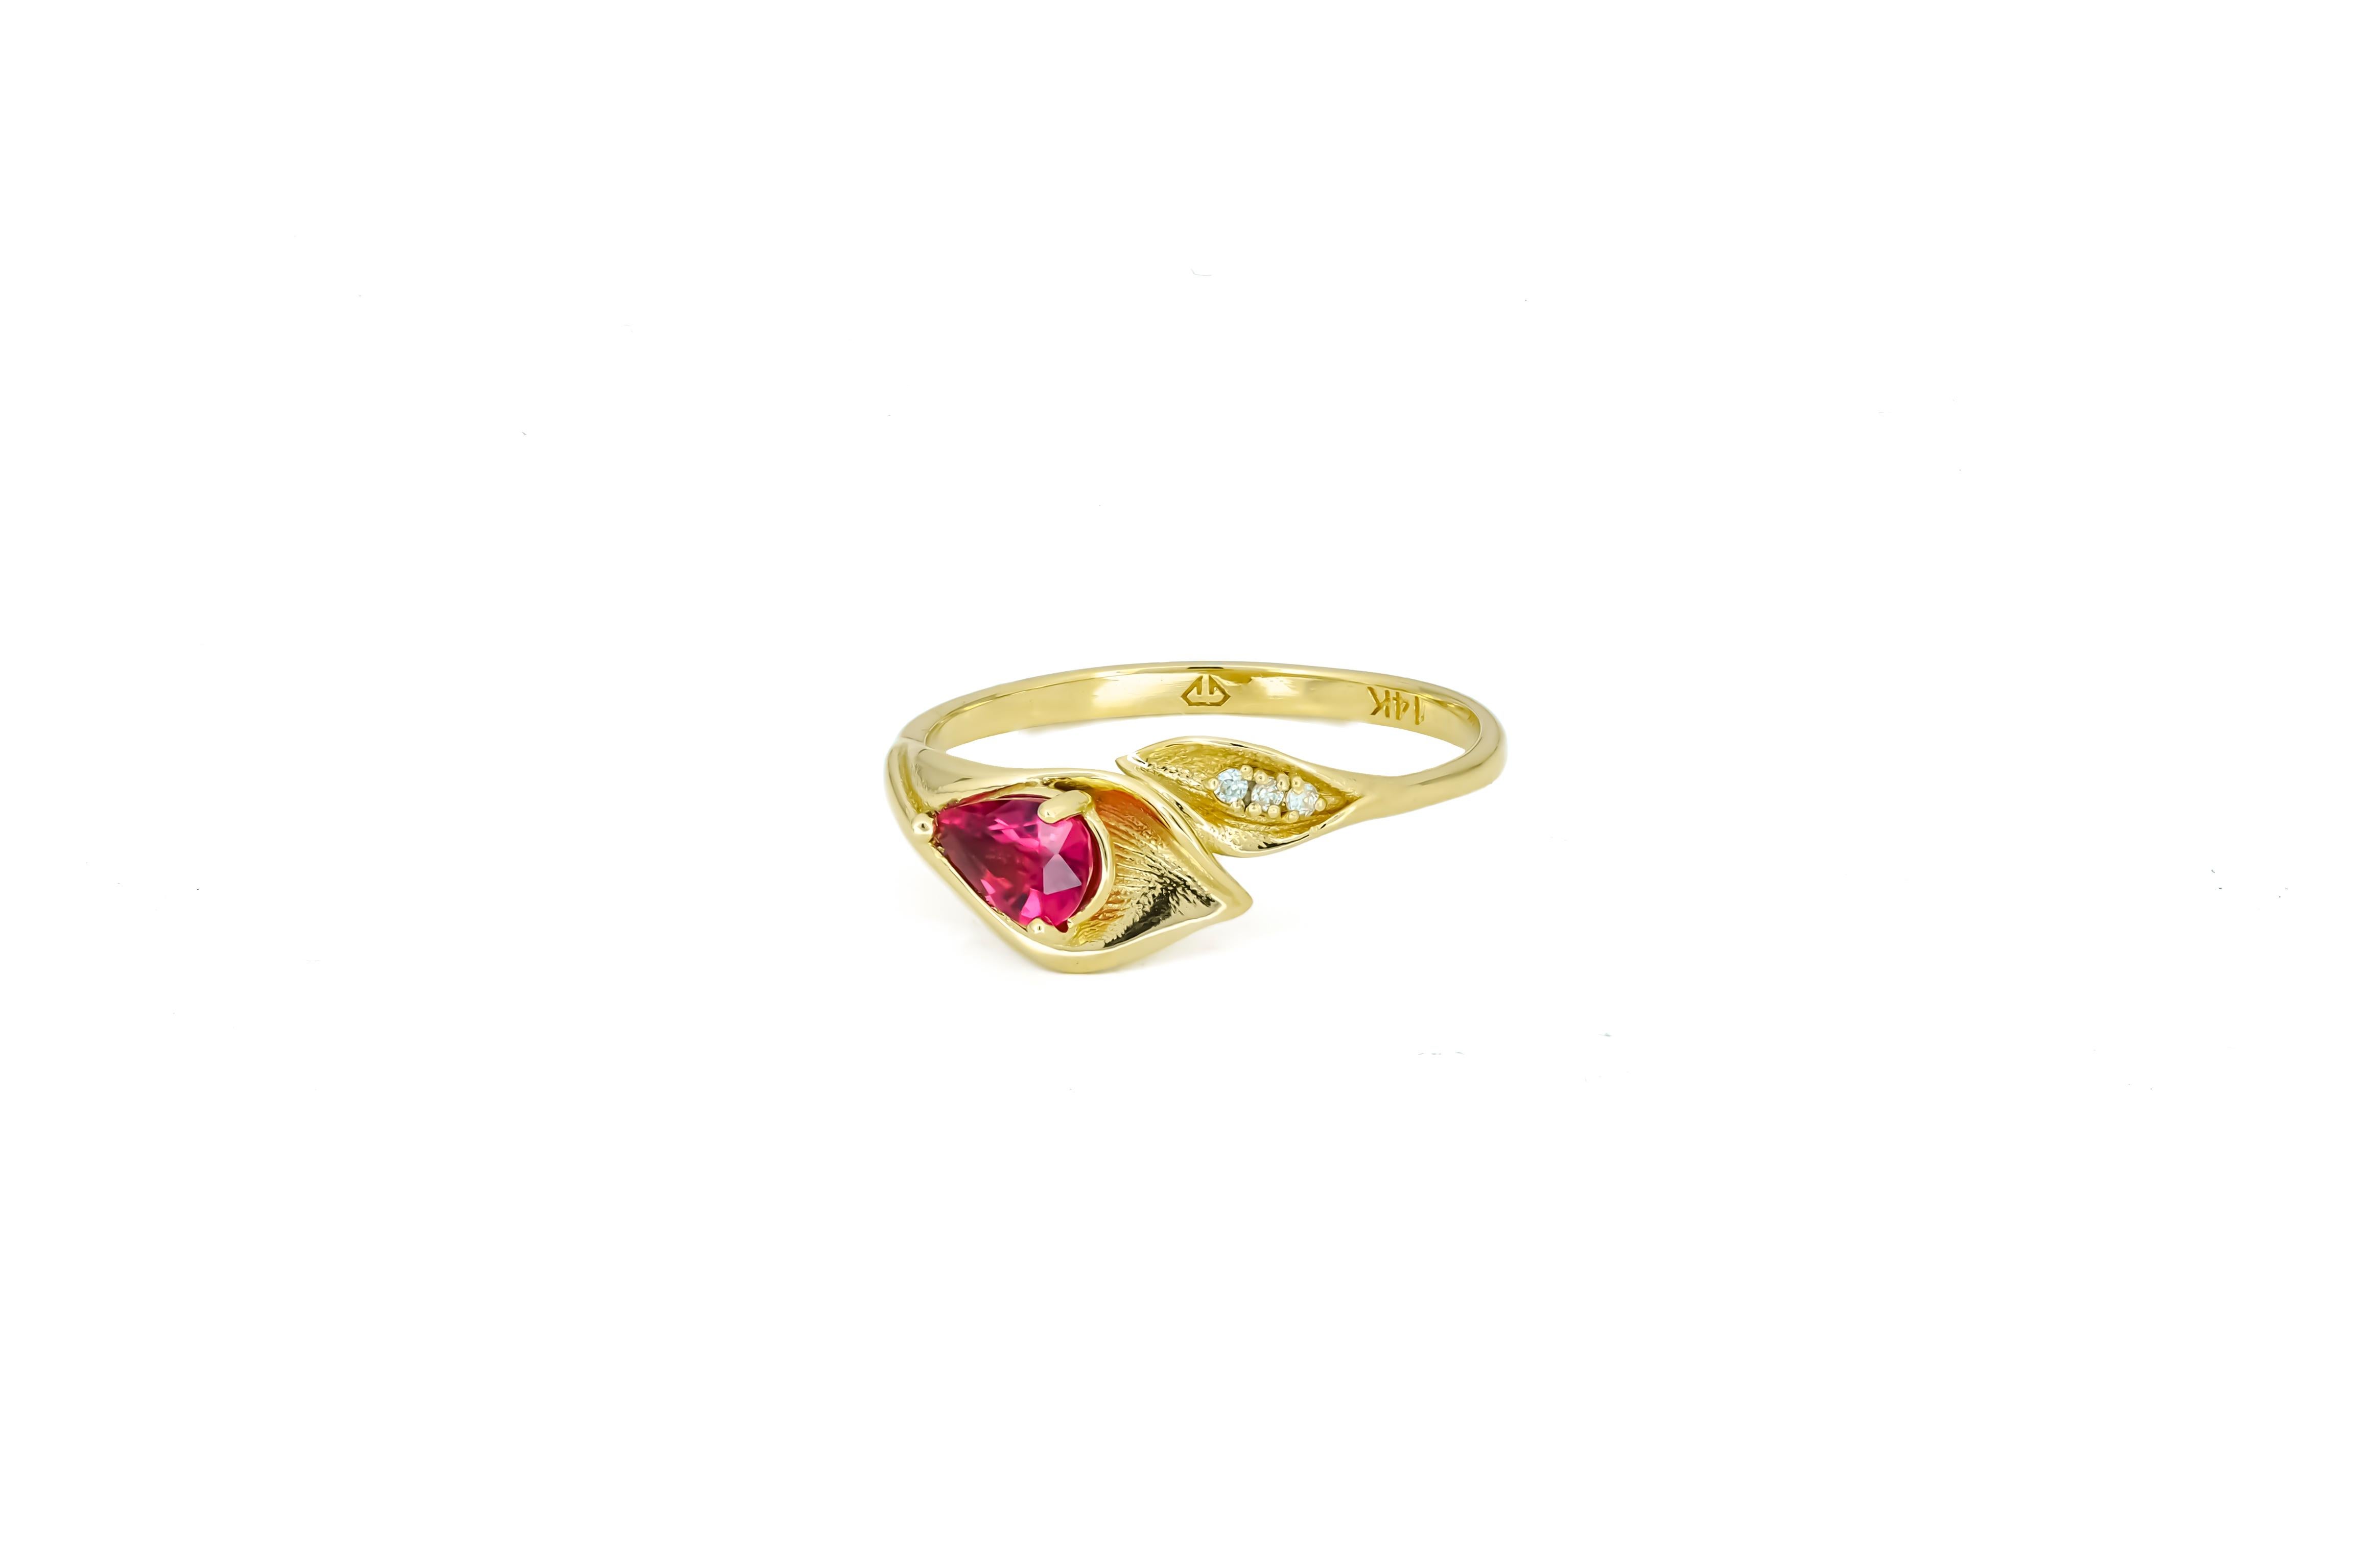 Lily Calla Gold Ring, 14 Karat Gold Ring with Garnet and Diamonds For Sale 1